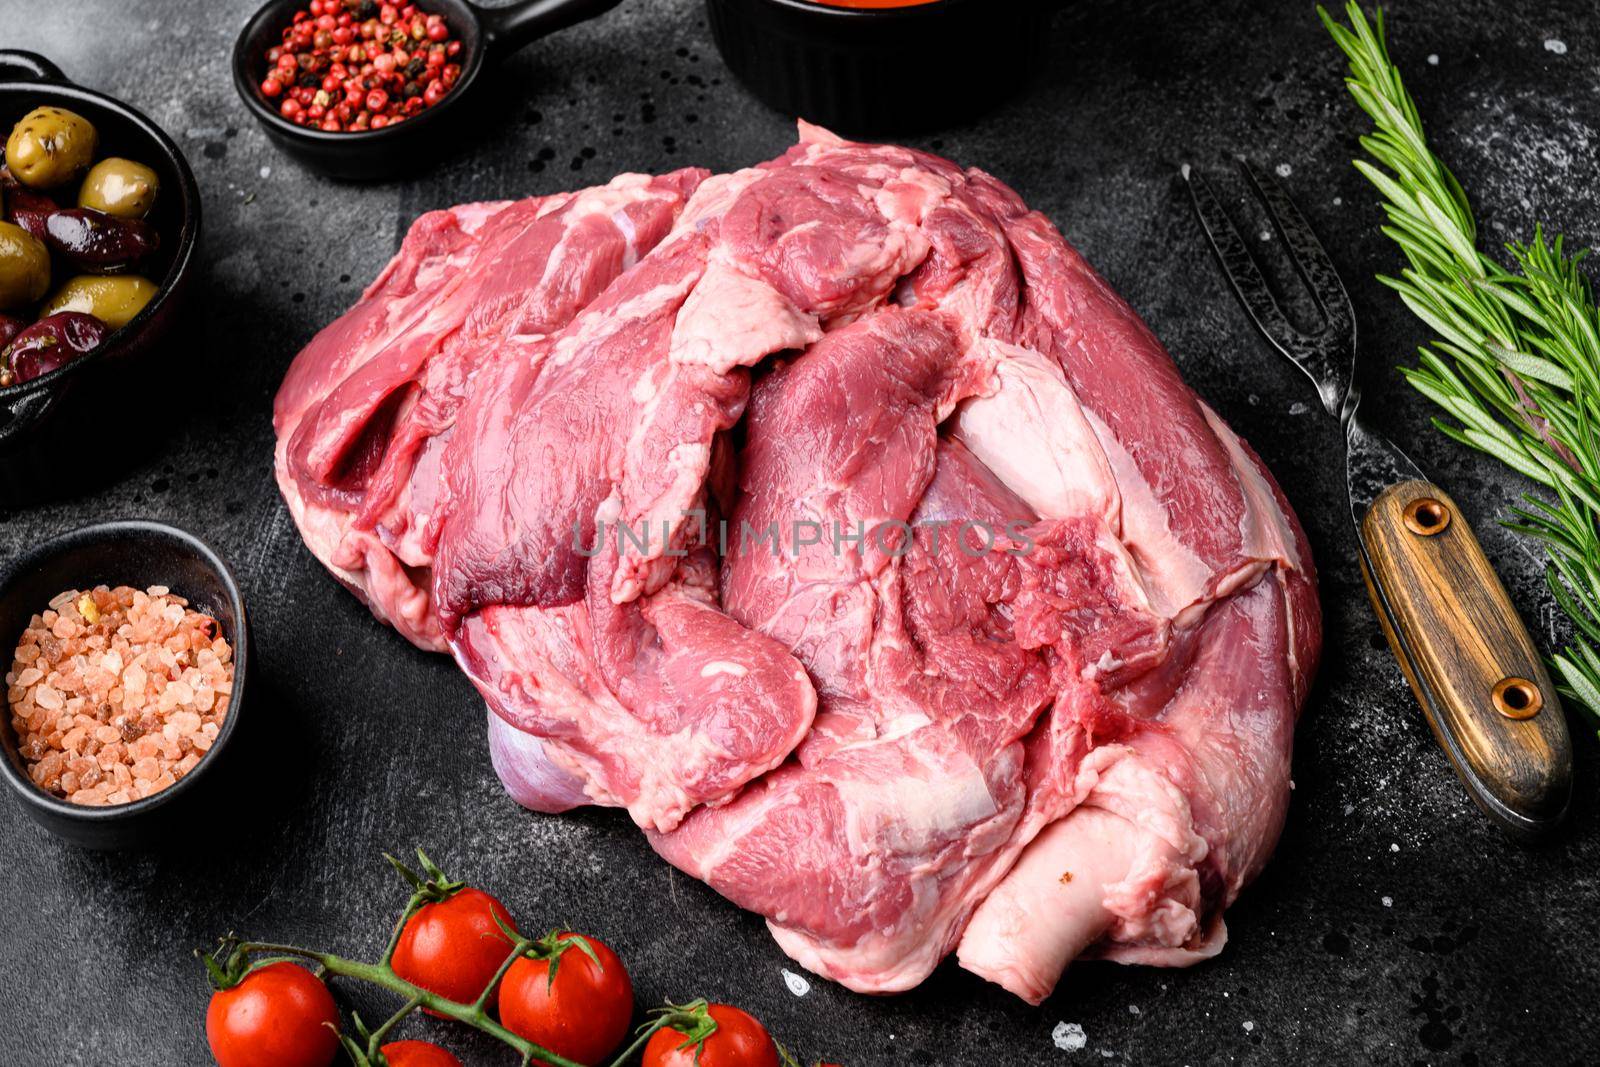 Fresh and raw meat Lamb or mutton, with ingredients and herbs, on black dark stone table background by Ilianesolenyi